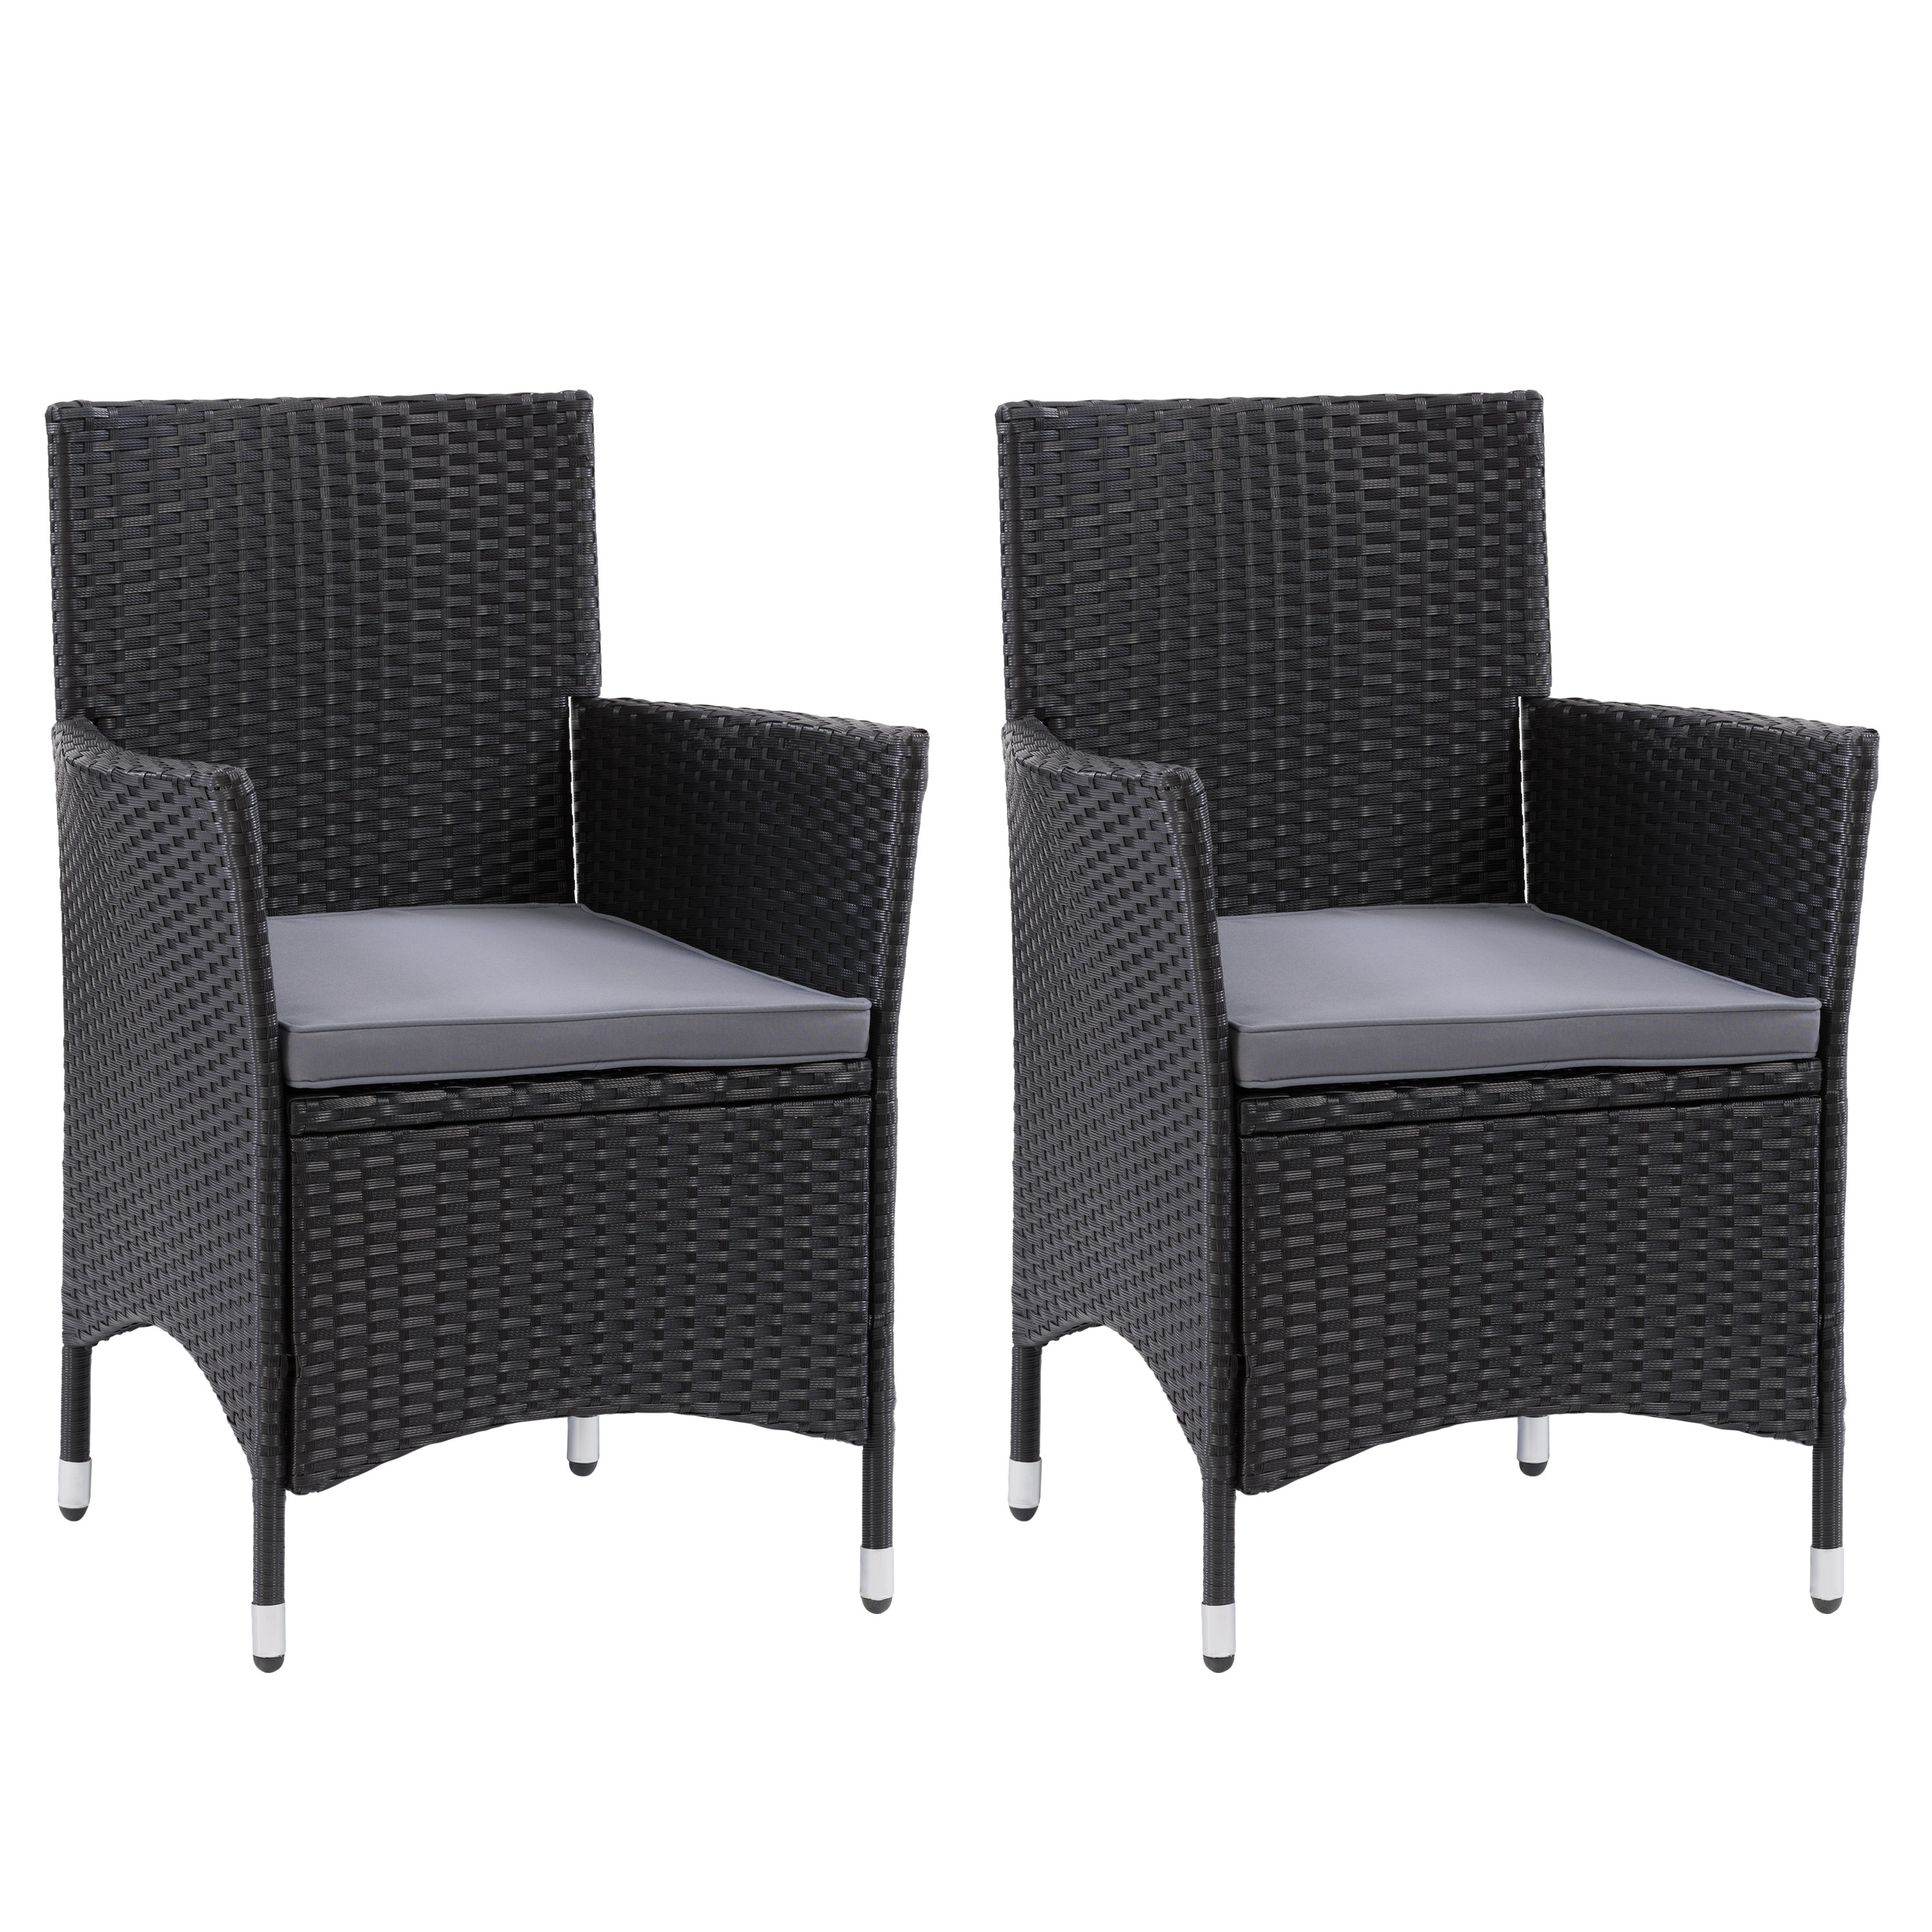 Parksville Set of 2 Wicker Black Steel Frame Stationary Dining Chair(s) with Gray Cushioned Seat | - CorLiving PRK-710-C